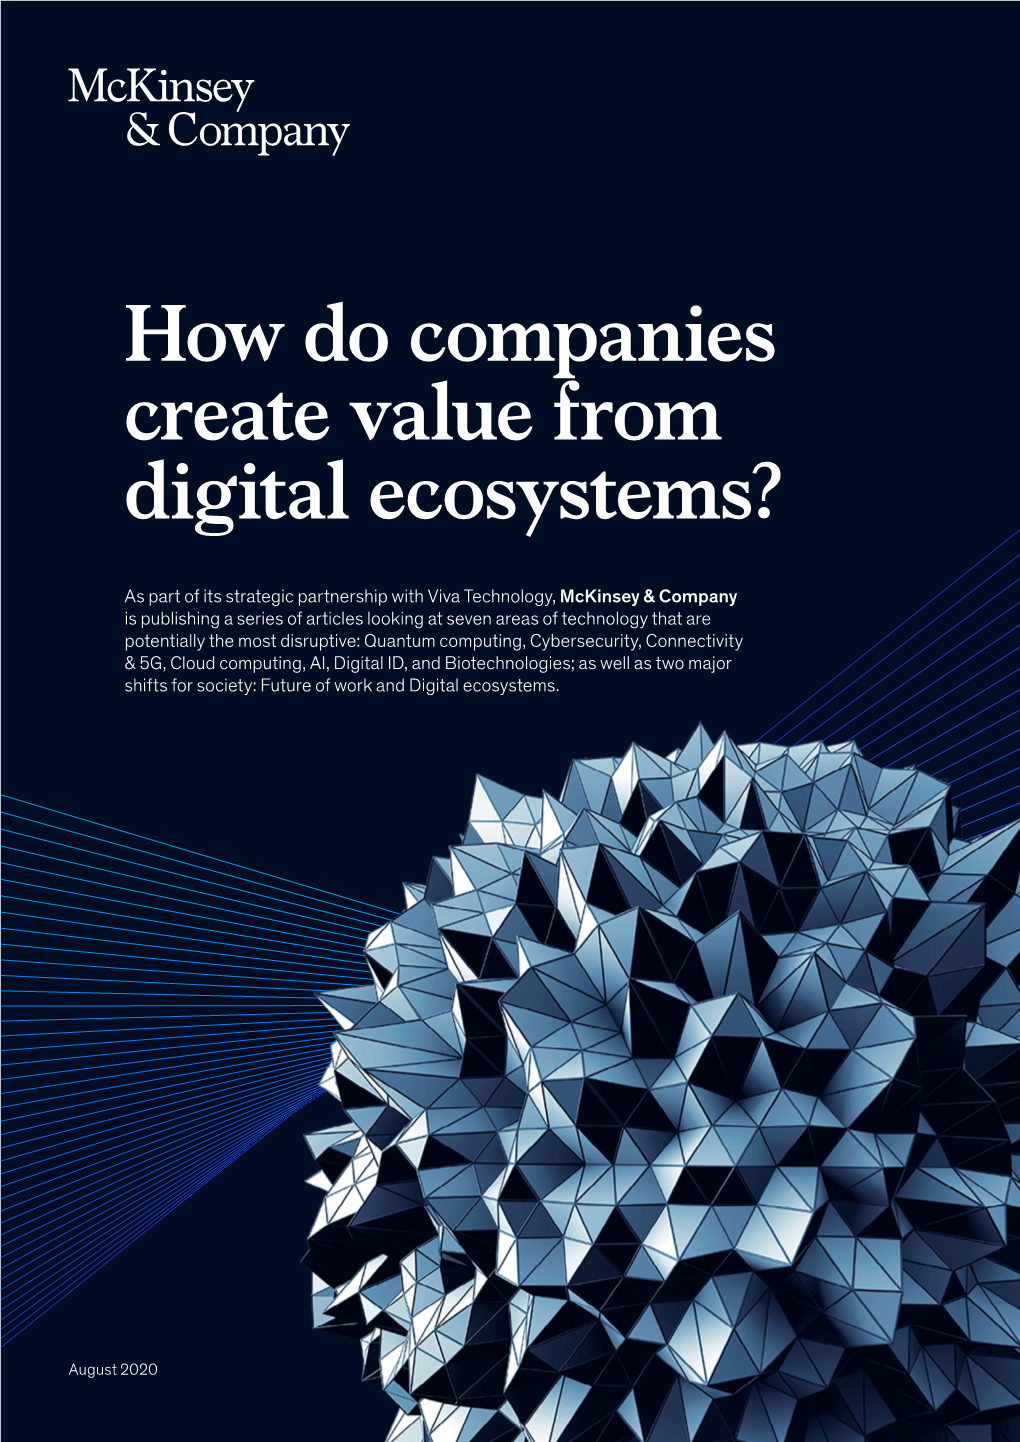 How Do Companies Create Value from Digital Ecosystems?